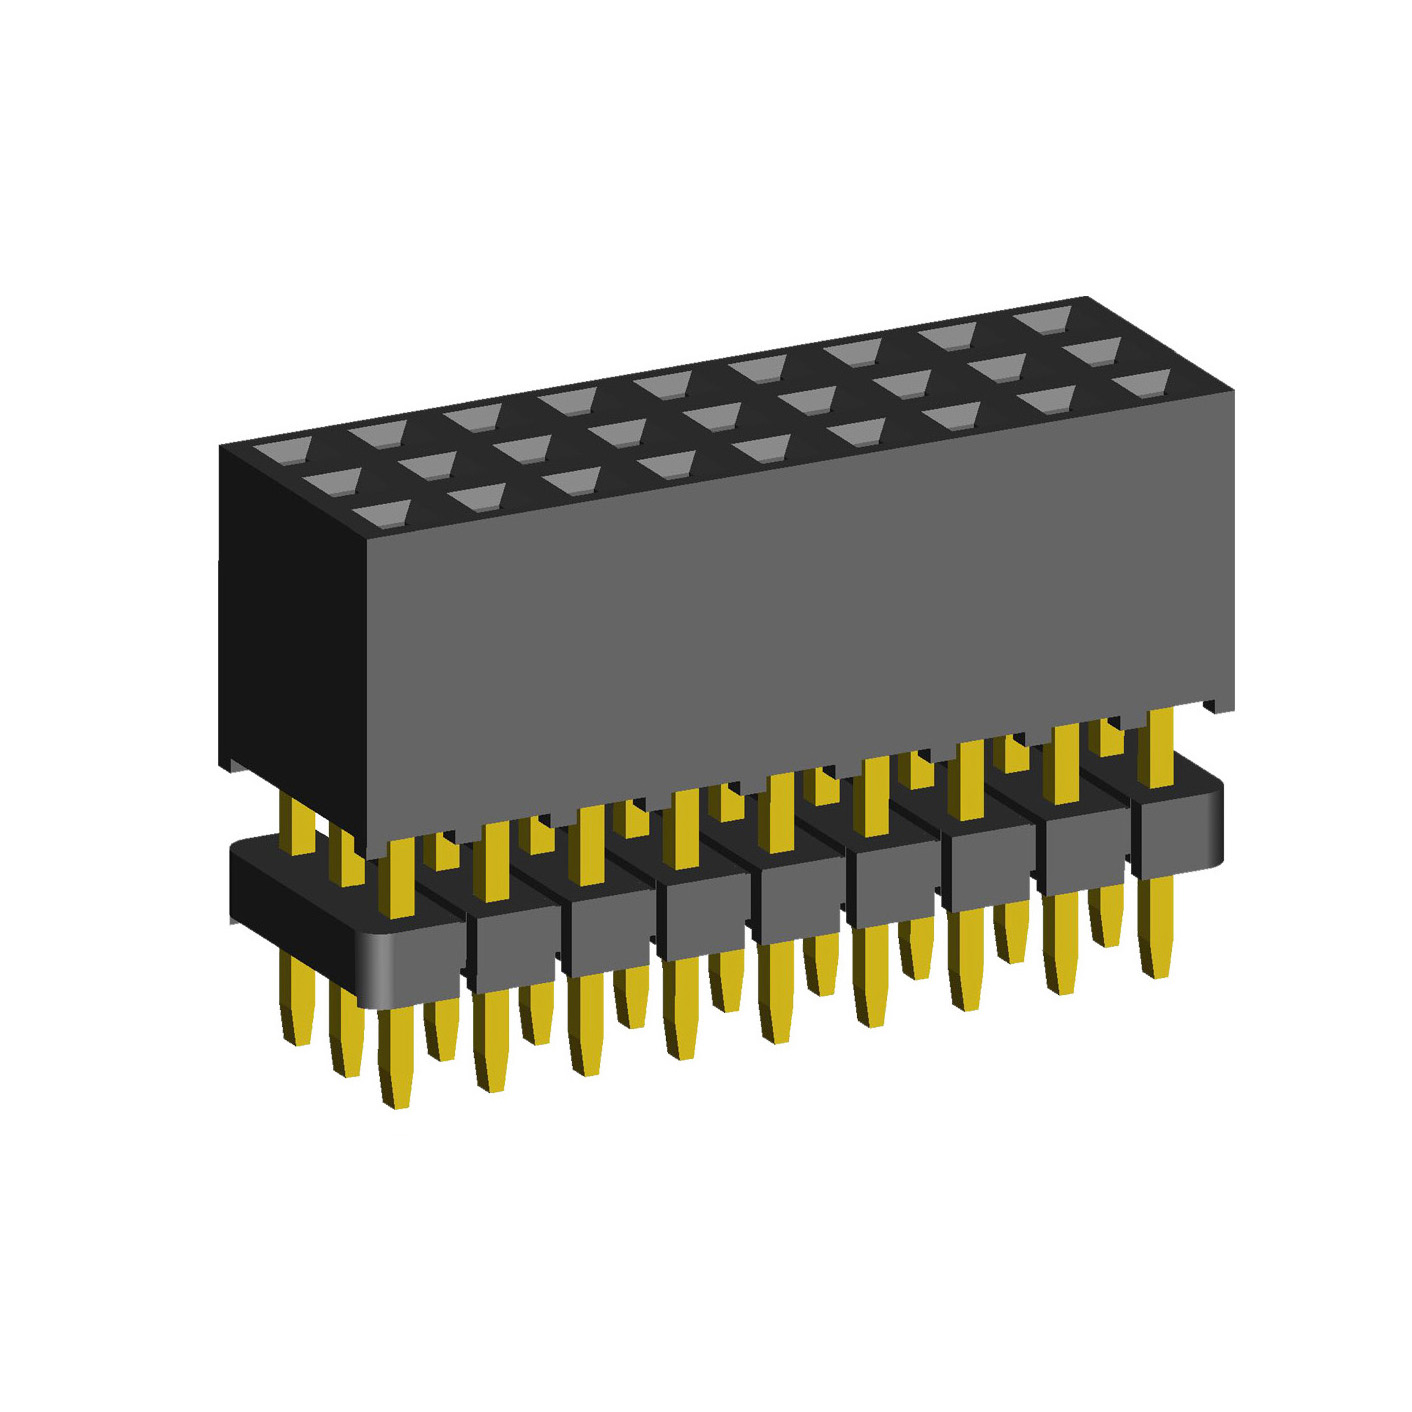 2203SDI-XXXG-935 series, straight three-row sockets with increased insulator on the Board for mounting in holes, pitch 2,0x2,0 mm, 3x40 pins